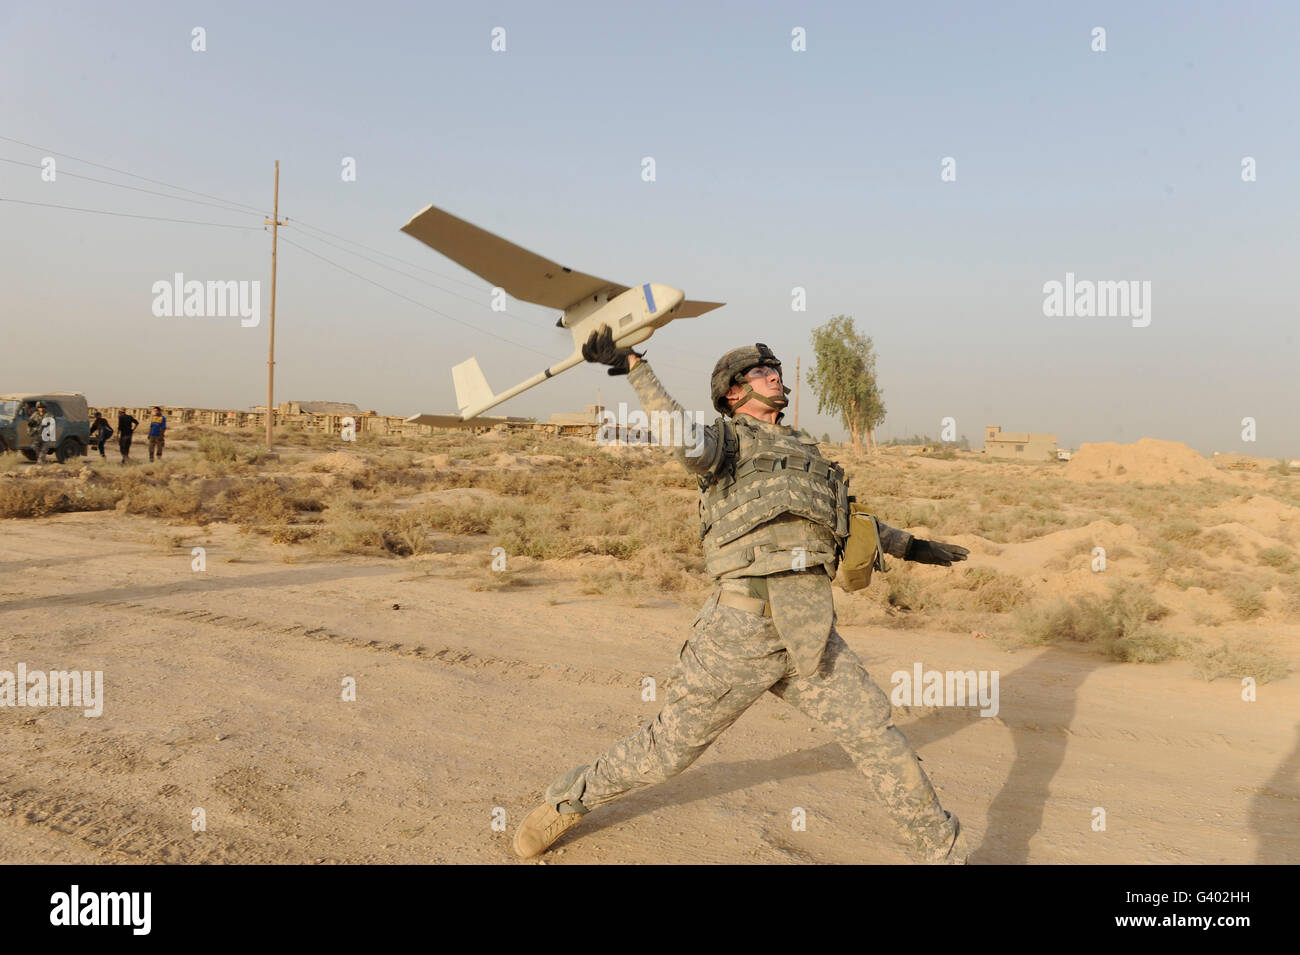 U.S. Army soldier launches an RQ-11 Raven unmanned aerial vehicle. Stock Photo